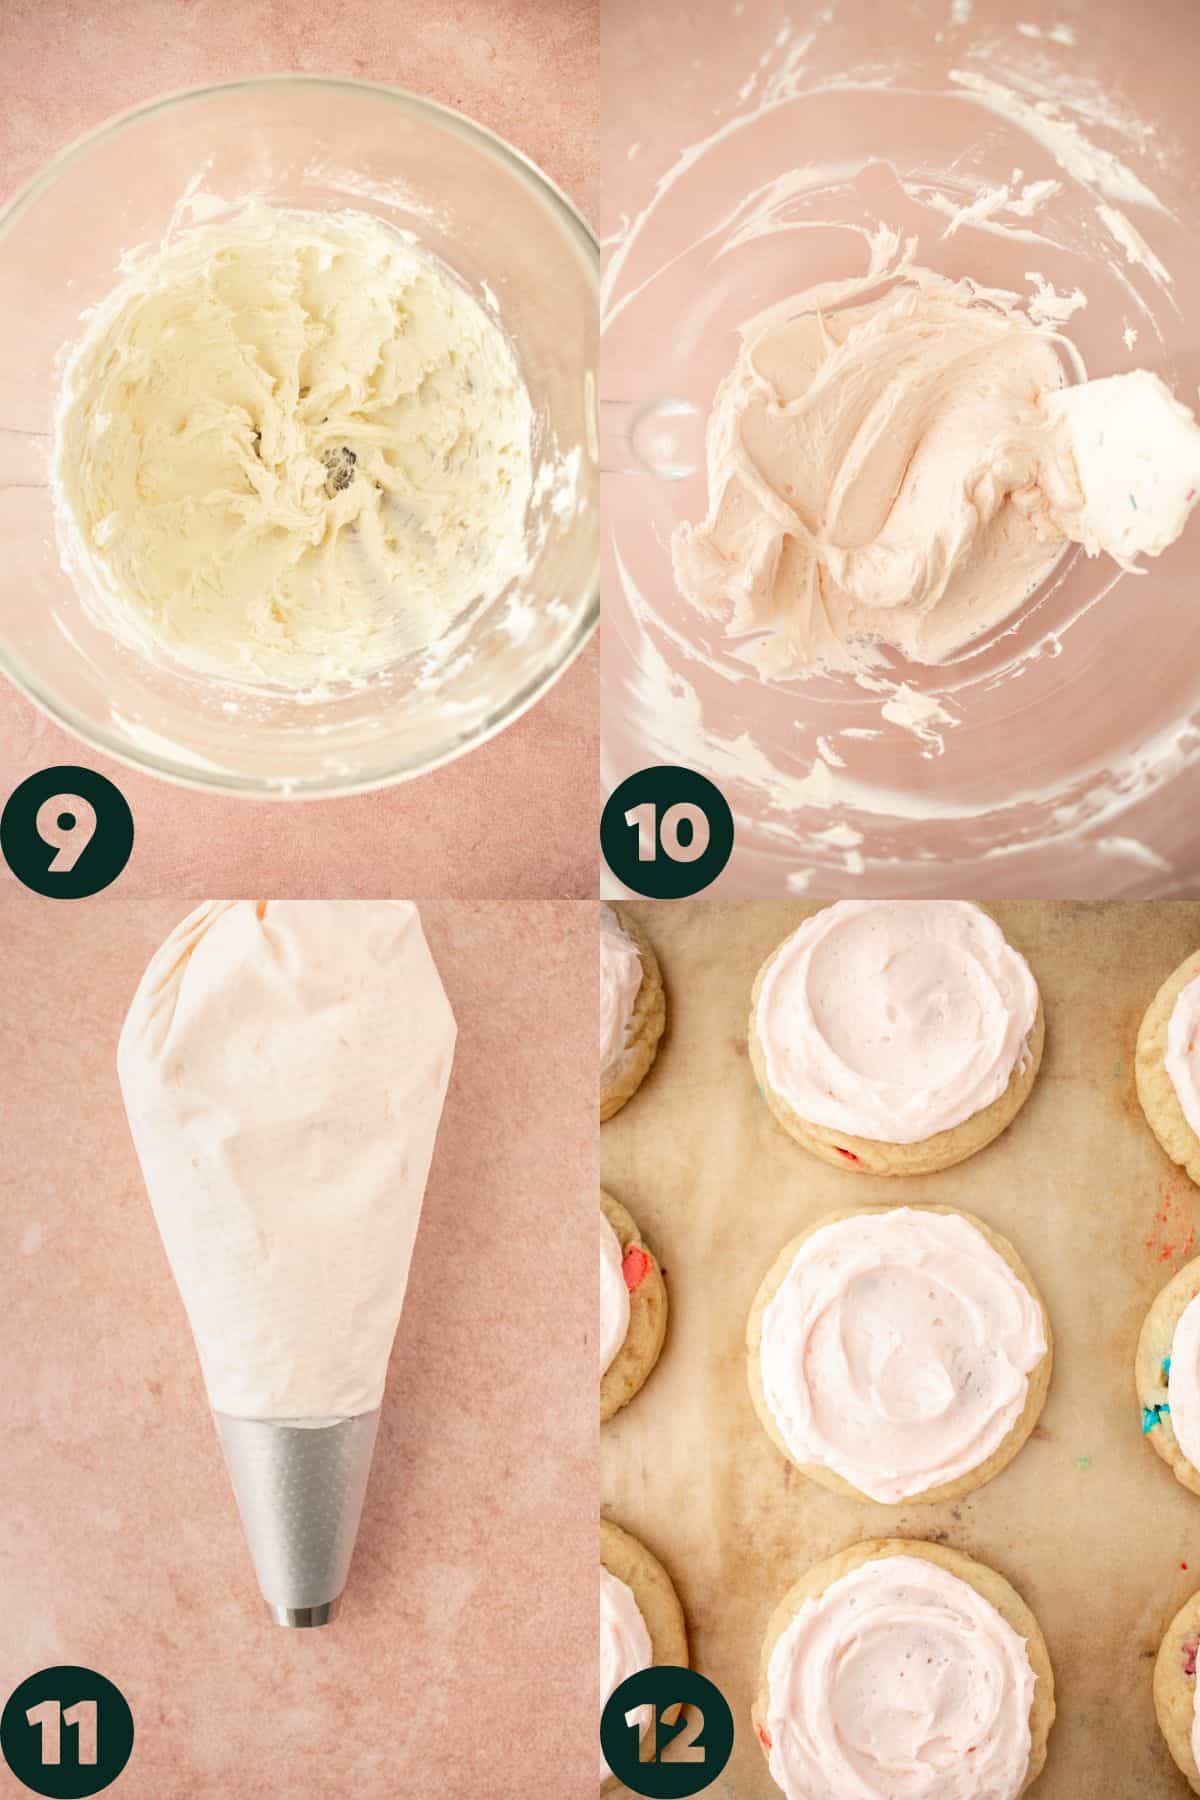 step by step photos making buttercream - butter and sugar beaten, vanilla, cream and pink food color beaten in, frosting in piping bag, frosting on the cookies